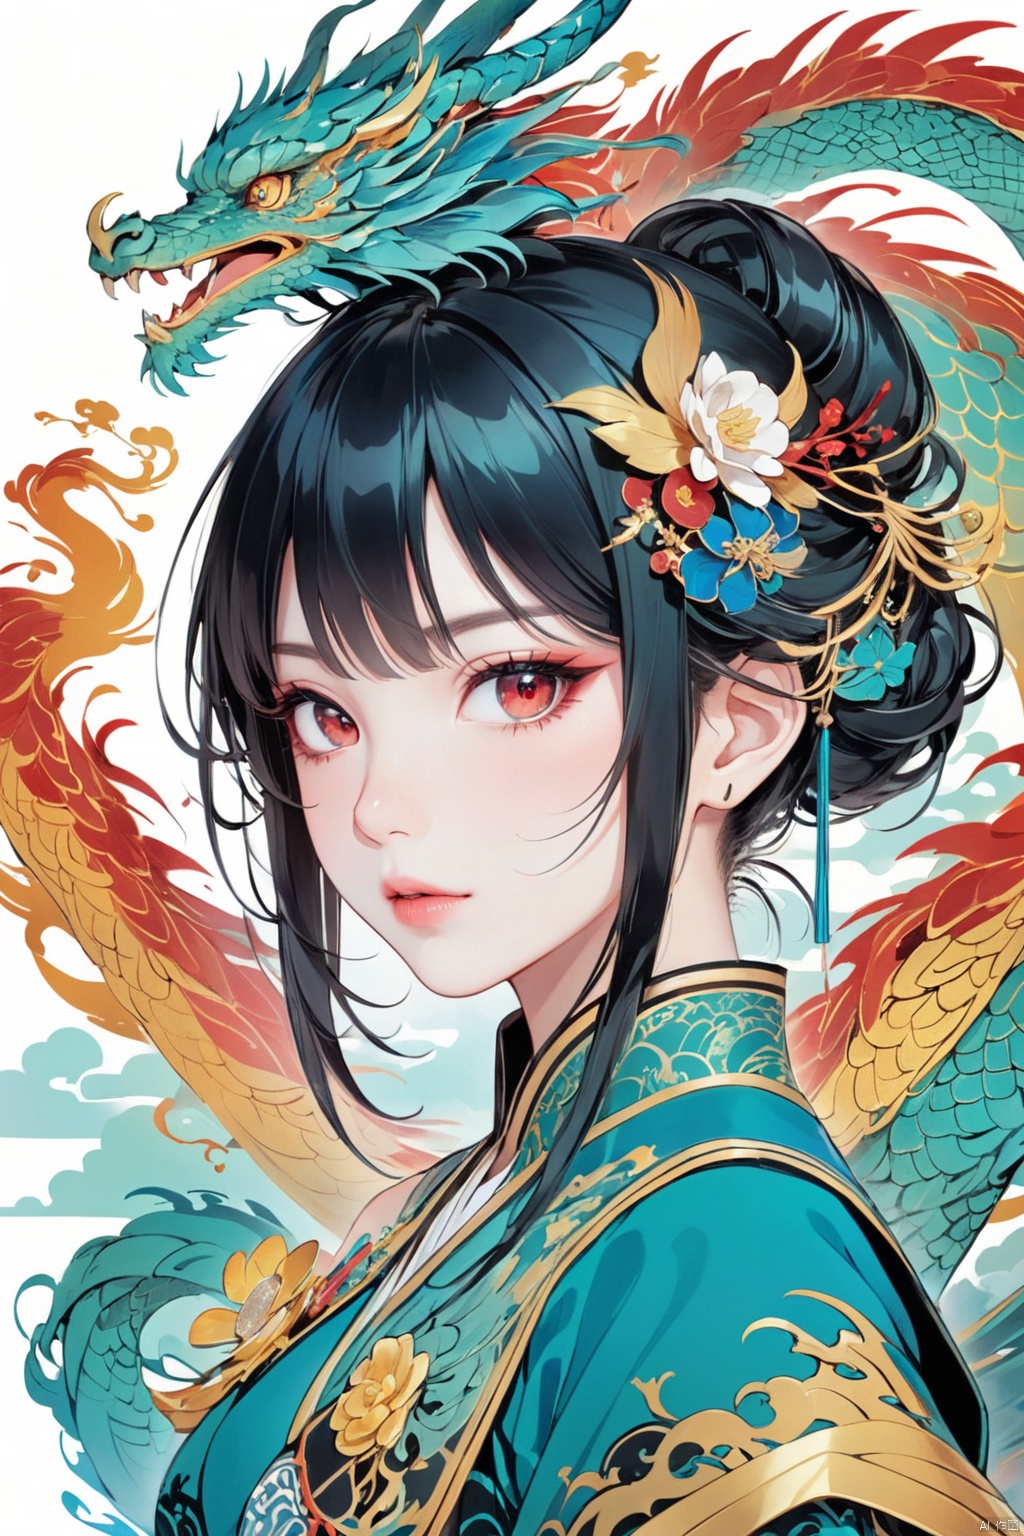  Illustration, digital art, anime style, hubggirl, red eyes, black hair, hair bun with accessories, traditional East Asian attire, rabbit ears headpiece, black and teal clothing, cloud pattern on garment, mystical, two dragons, one on shoulder and one in foreground, pale skin, blush on cheeks, serious expression, white background, portrait, upper body shot, artful composition, detailed line art, vibrant color contrast., HUBG_Beauty_Girl, GUOFENG